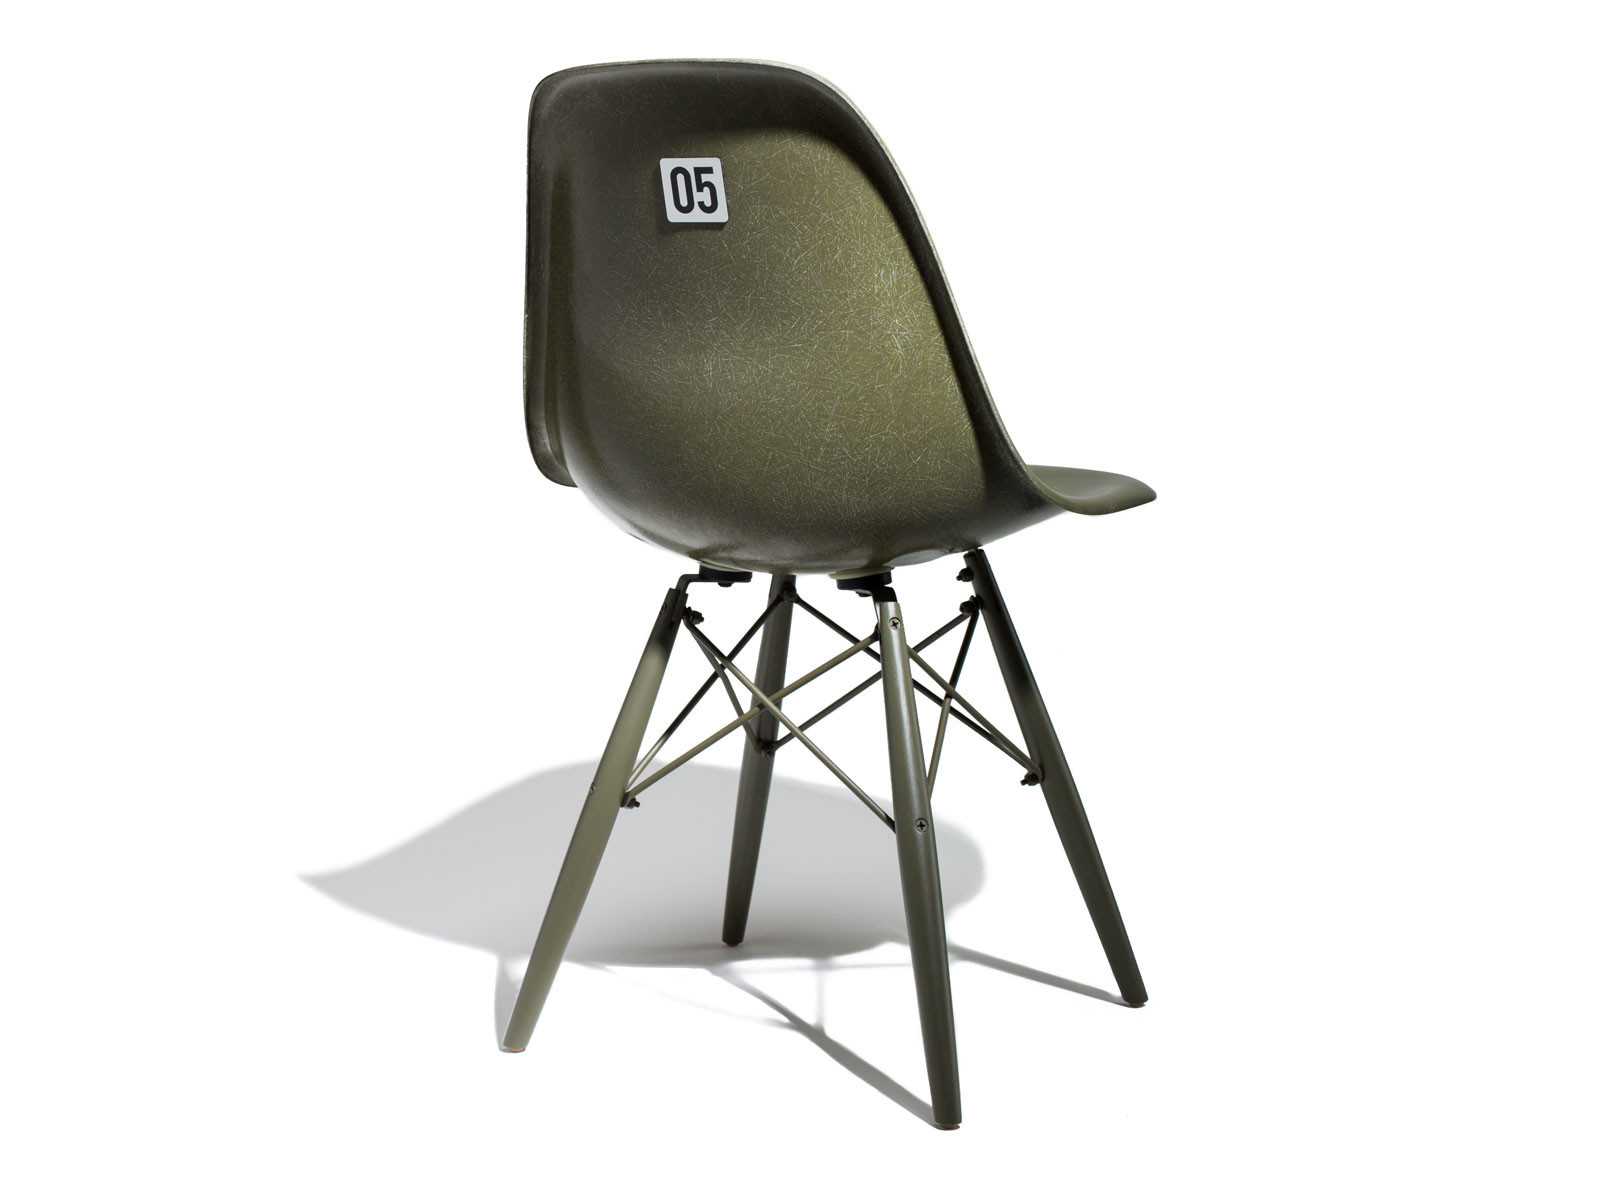 http://www.houyhnhnm.jp/news/images/accessories_misc_undftdxmodernica_undftd-modernica-chair_MDNC.UND.view_2.color_olive_2048x2048.jpg